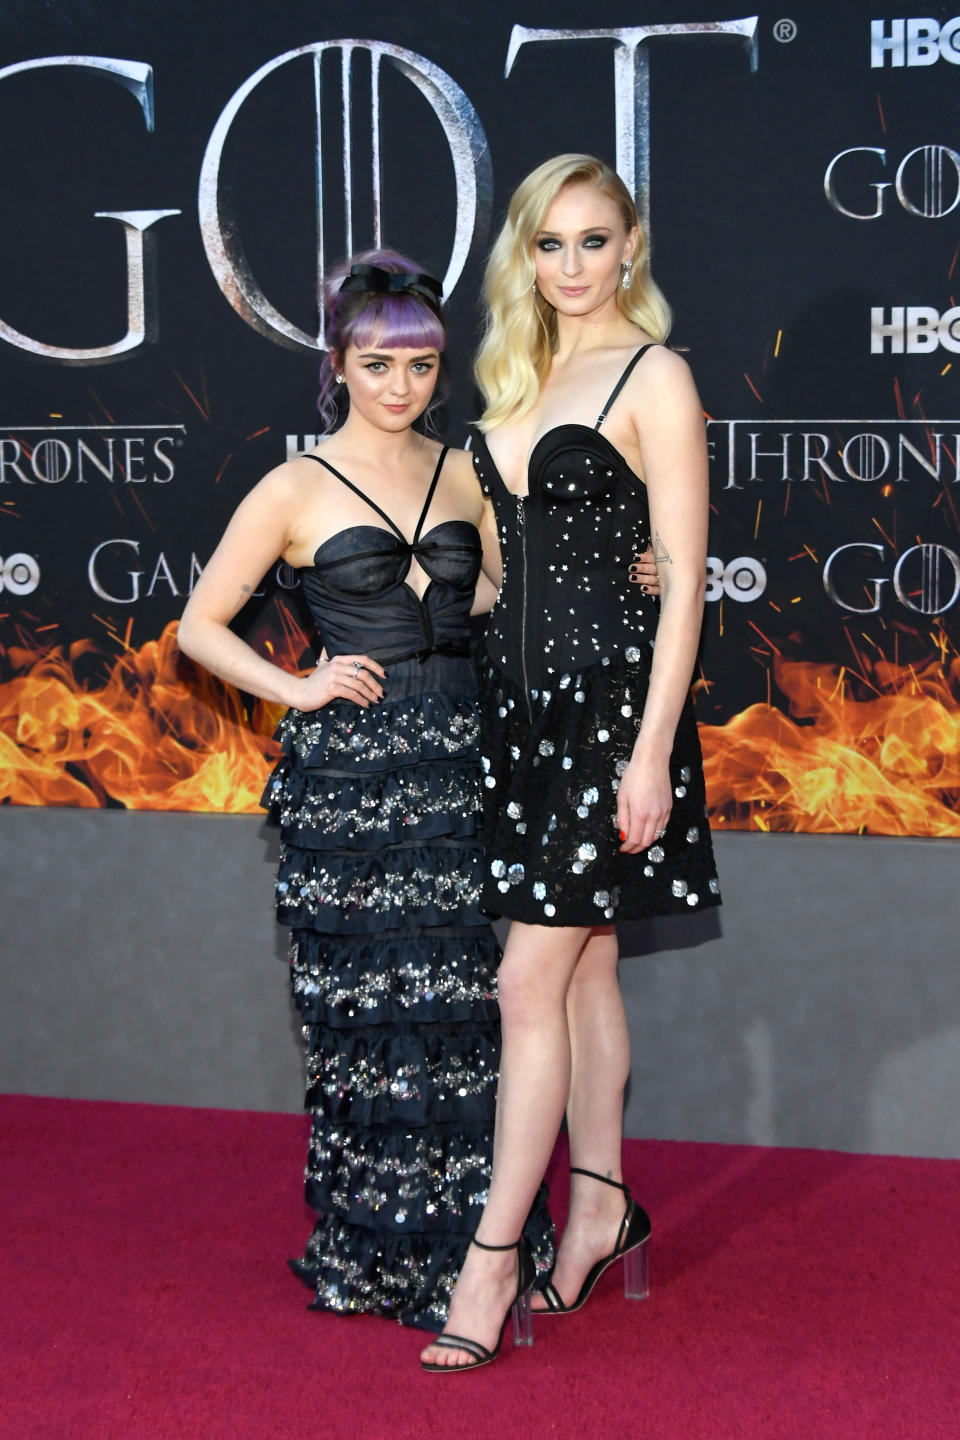 Maisie Williams and Sophie Turner at the ‘Game of Thrones’ season eight premiere in NYC